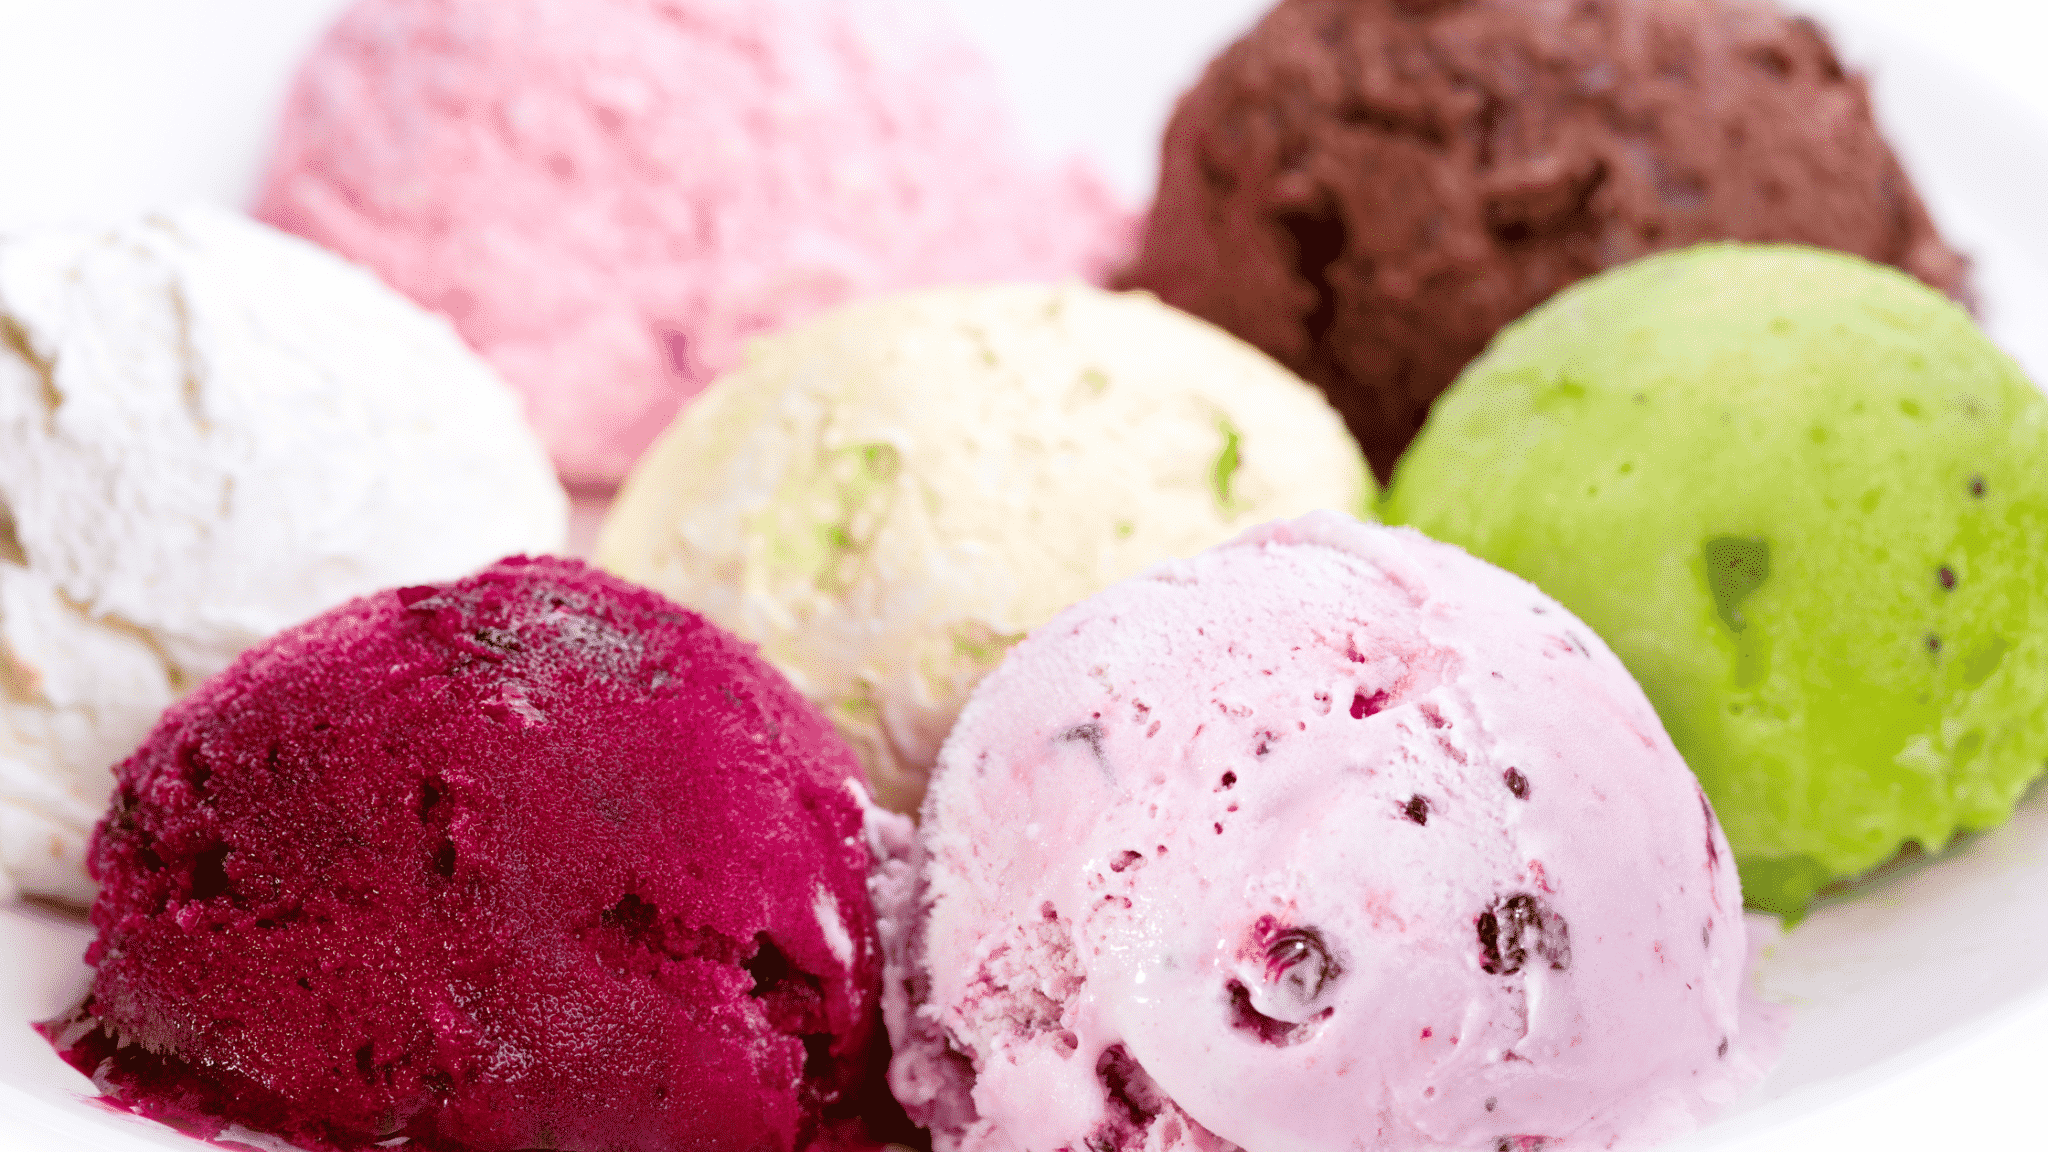 scoops of different flavors of ice cream